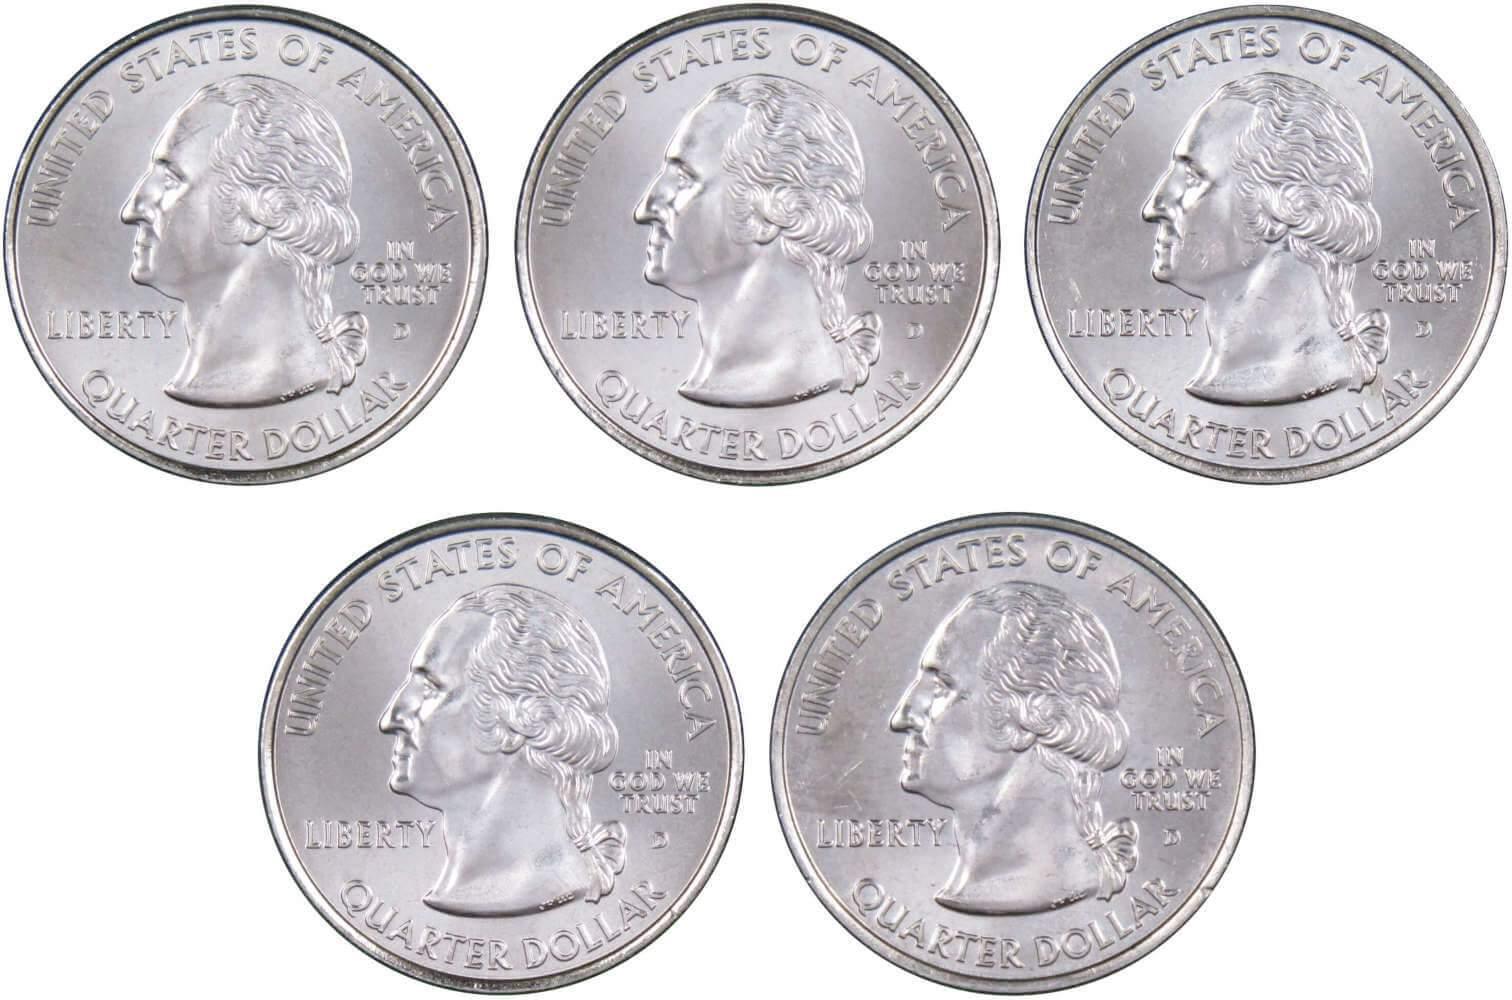 2005 D State Quarter 5 Coin Set BU Uncirculated Mint State 25c Collectible